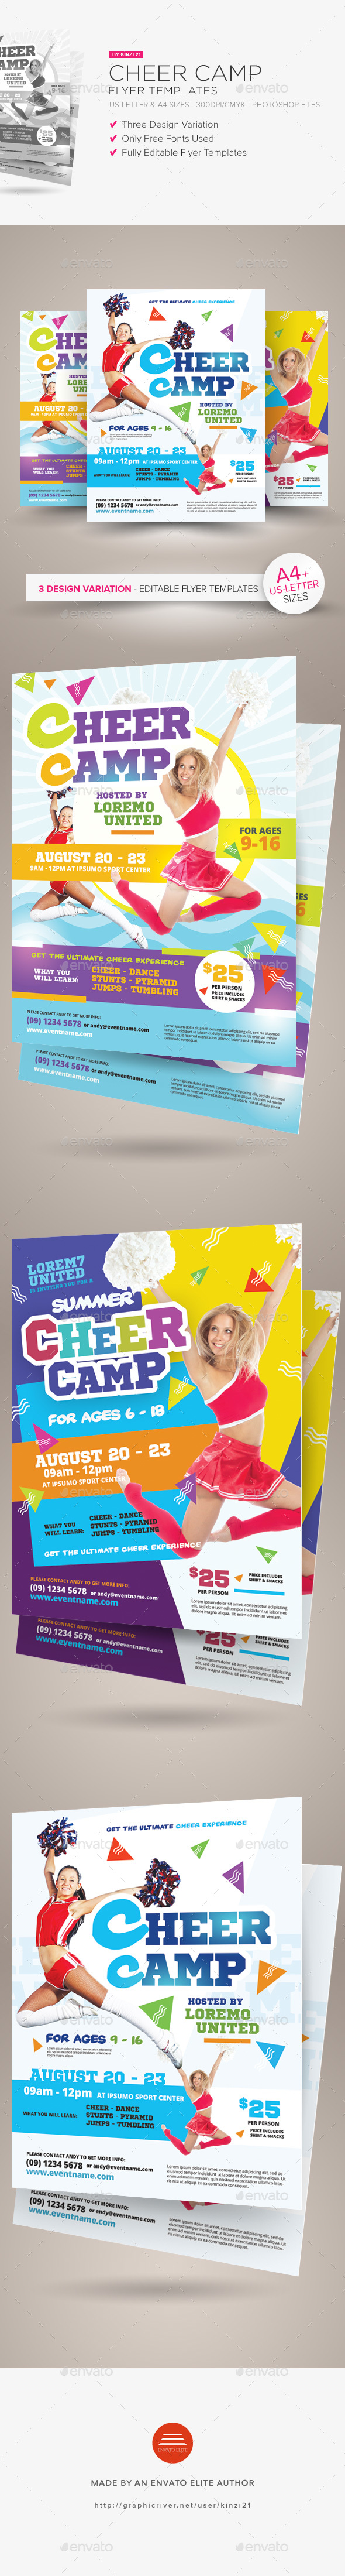 Cheer Camp Flyer Templates by kinzi21 GraphicRiver